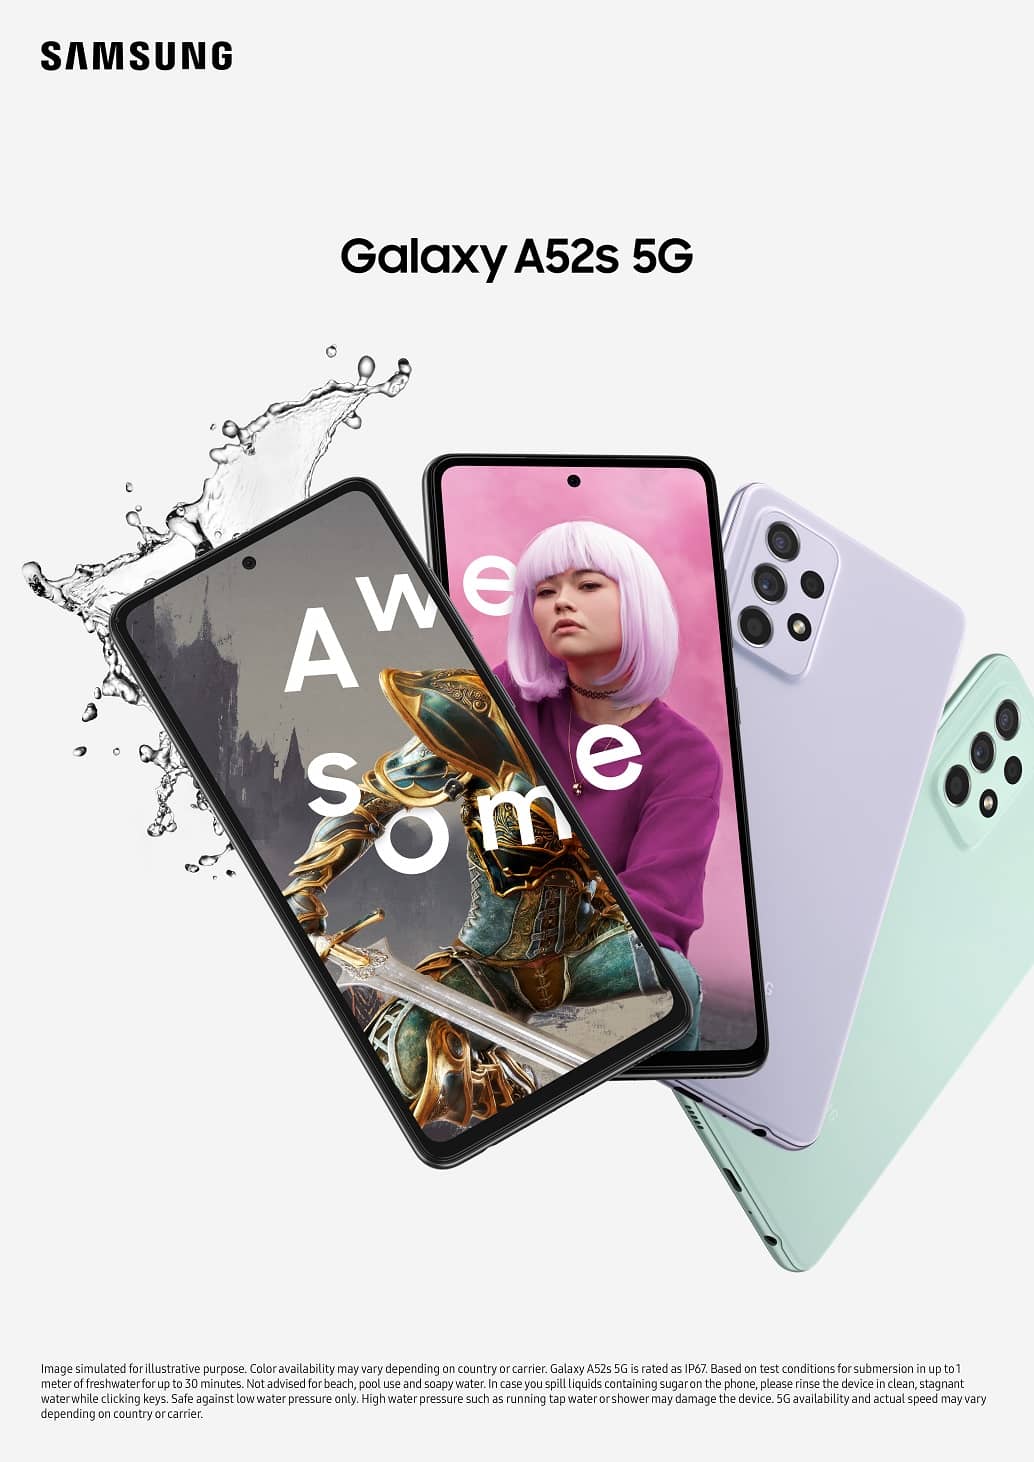 New Awesome Galaxy A52s 5G